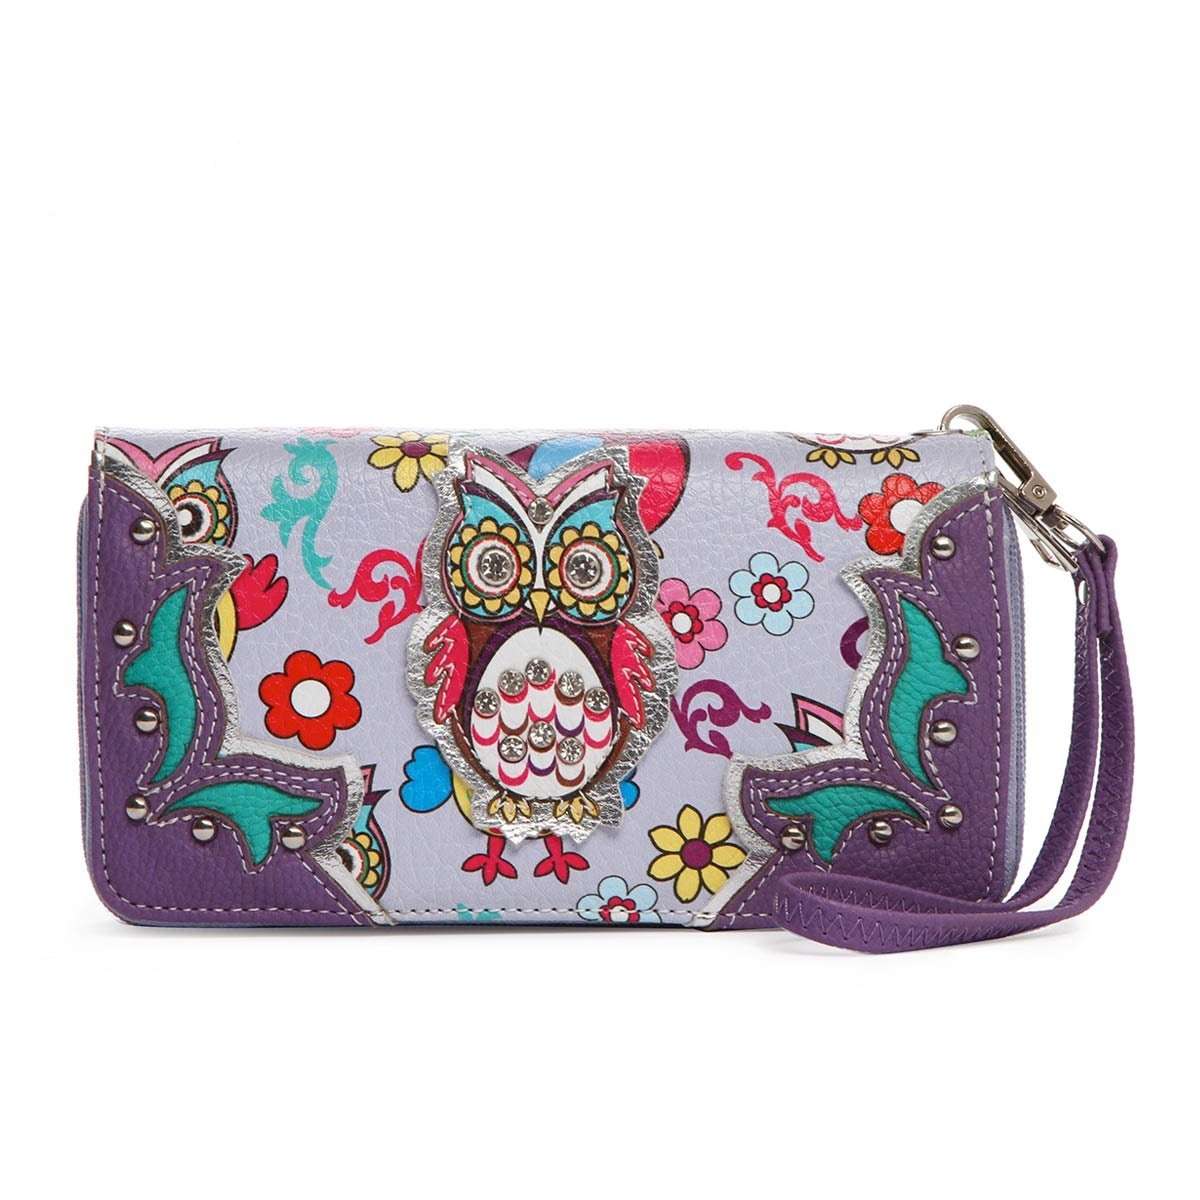 Designs by MyUtopia Shout Out:Cowgirl Trendy Multi Colorful Owl Print Western Wristlet Wallet,Purple,Clutch Wallet